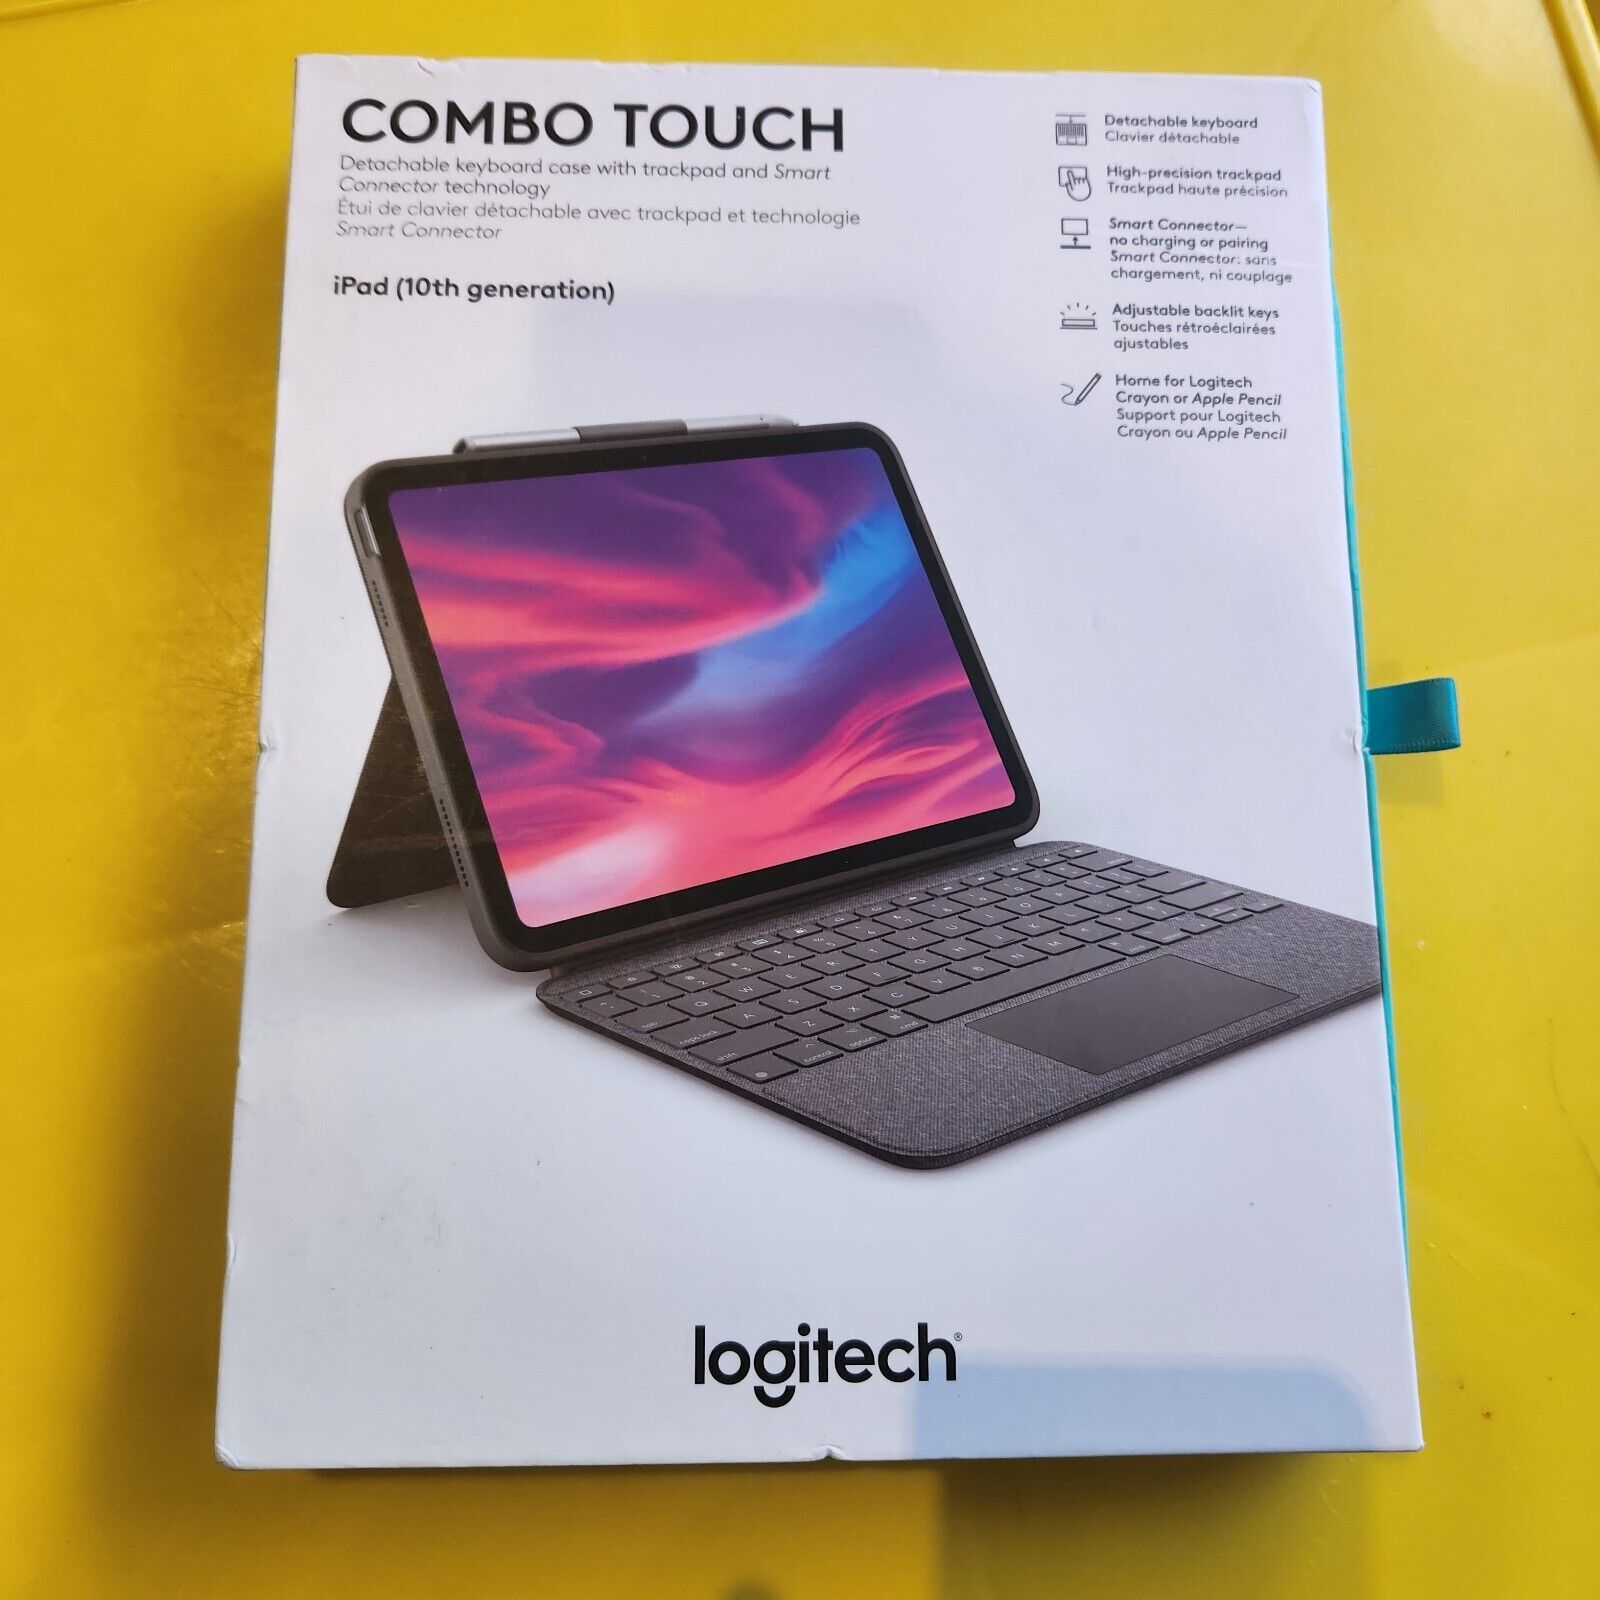 Logitech Combo TOUCH iPad 10 (10th generation) New 1Yr Warranty FREE POSTAGE 